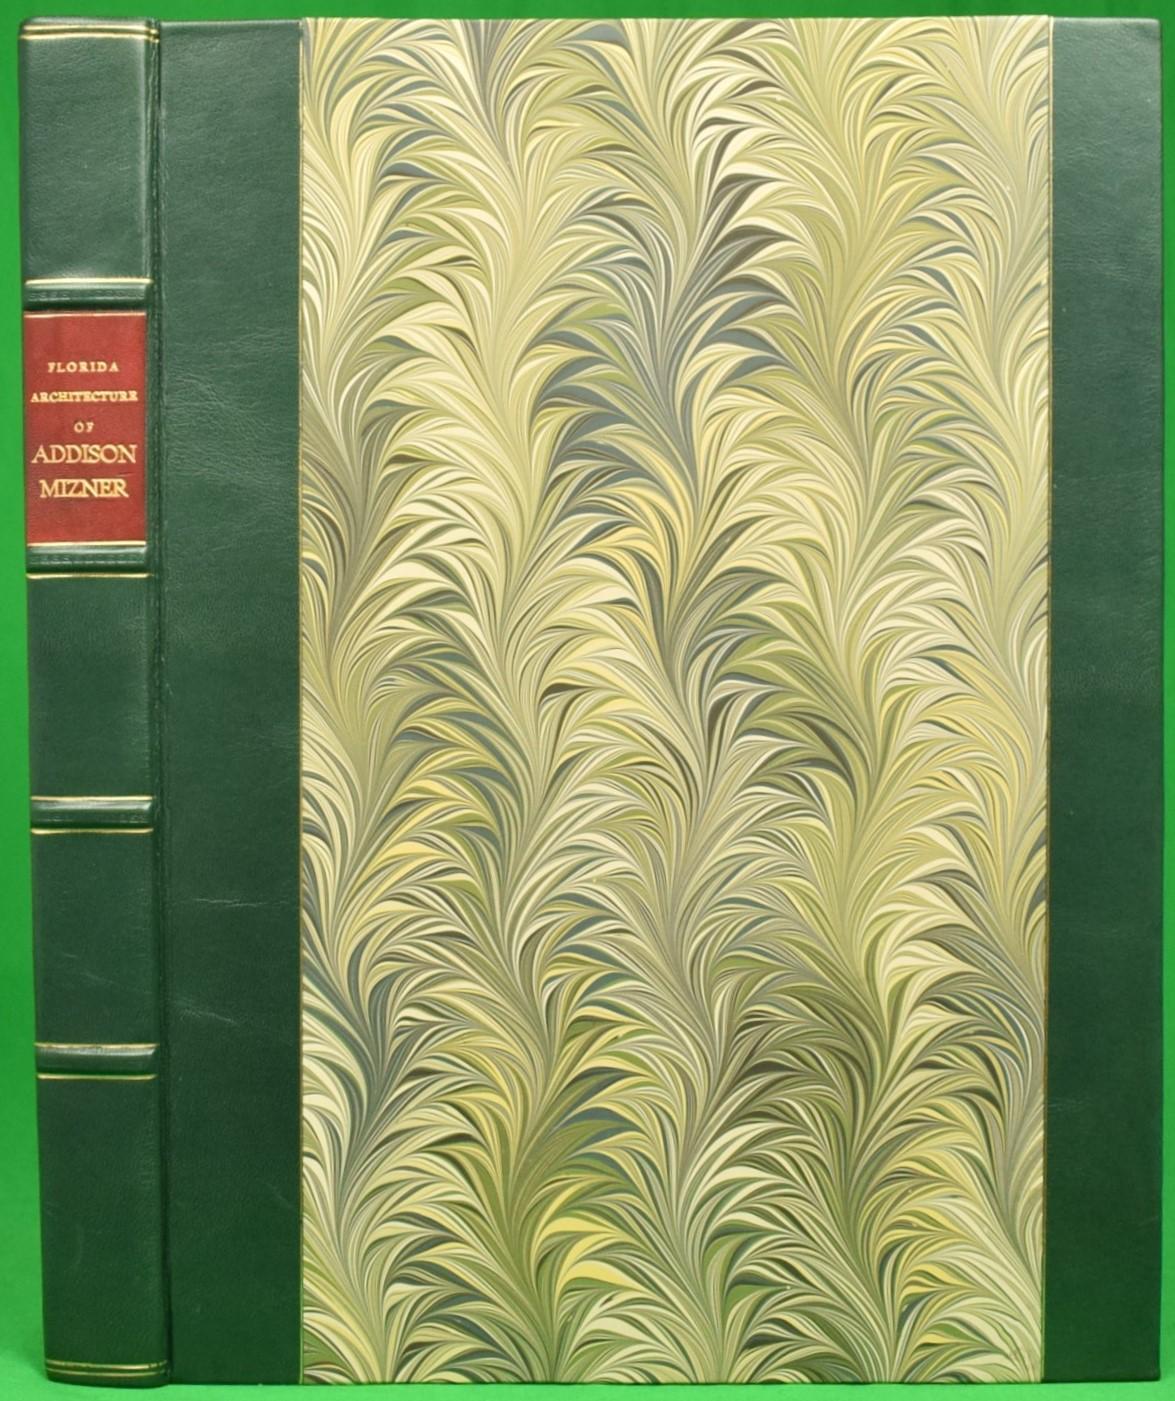 TARBELL, Ida M. [introduction by]

[184] pp.

William Helburn, Inc

First Edition

1928

16 1/4" x 12 1/4"

Beautifully custom rebound w/ marbled boards & hunter green leather spine and trim by Currier Bindery of Newport, RI.

First edition of this